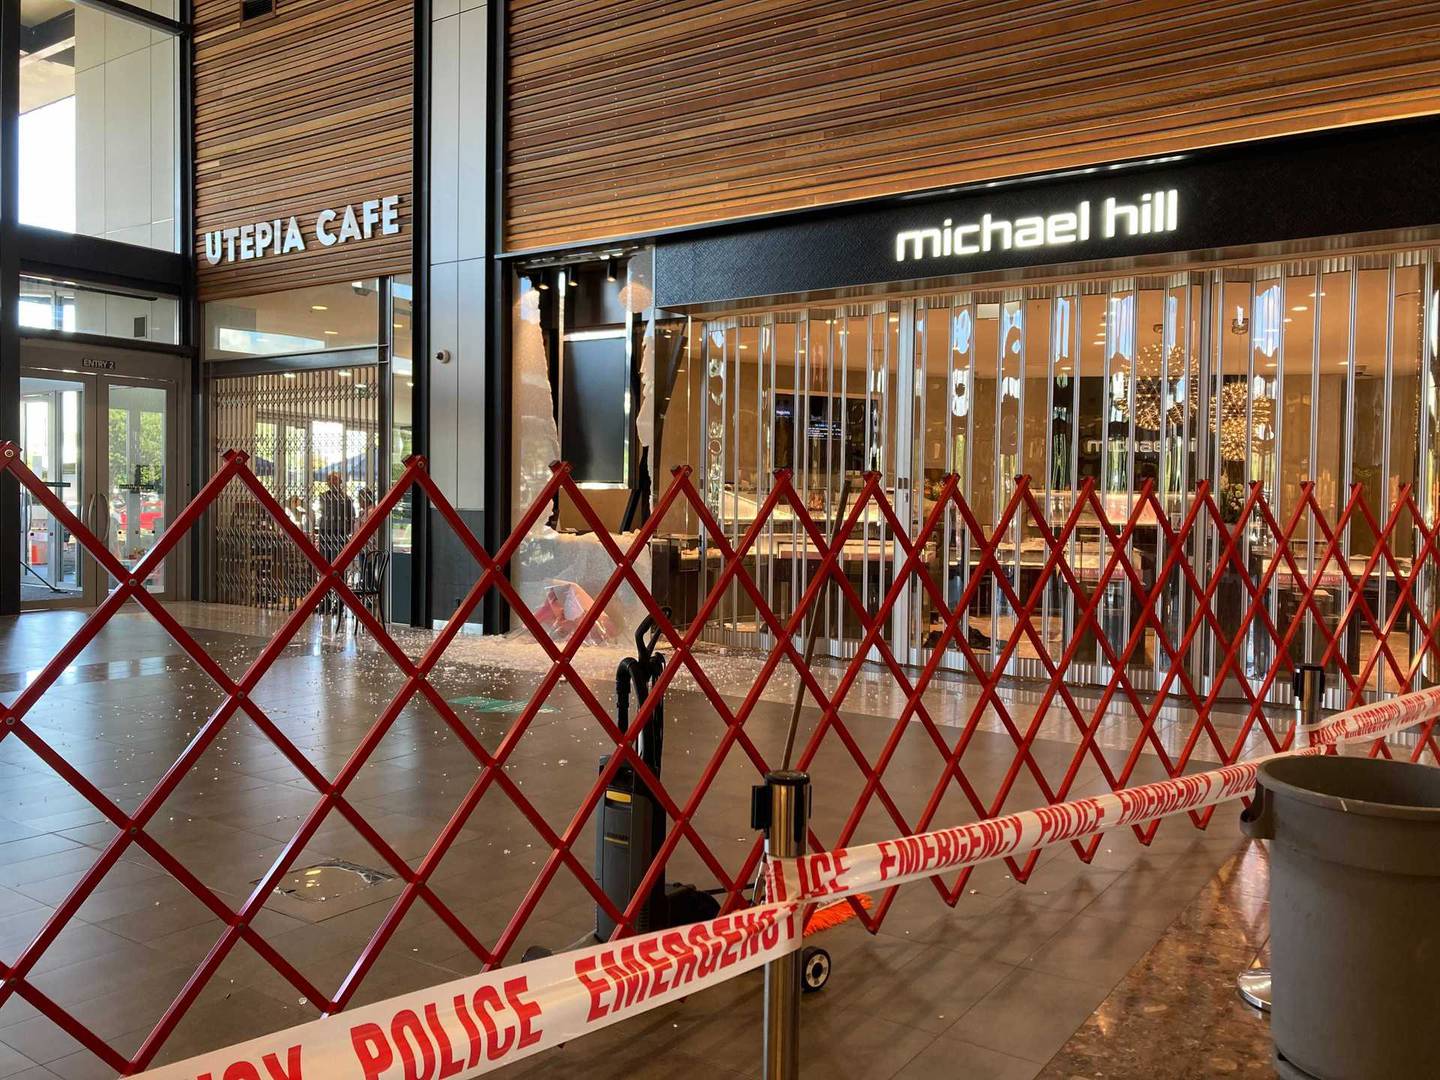 Burglaries, even in prominent malls in Auckland, can be avoided by using security grilles